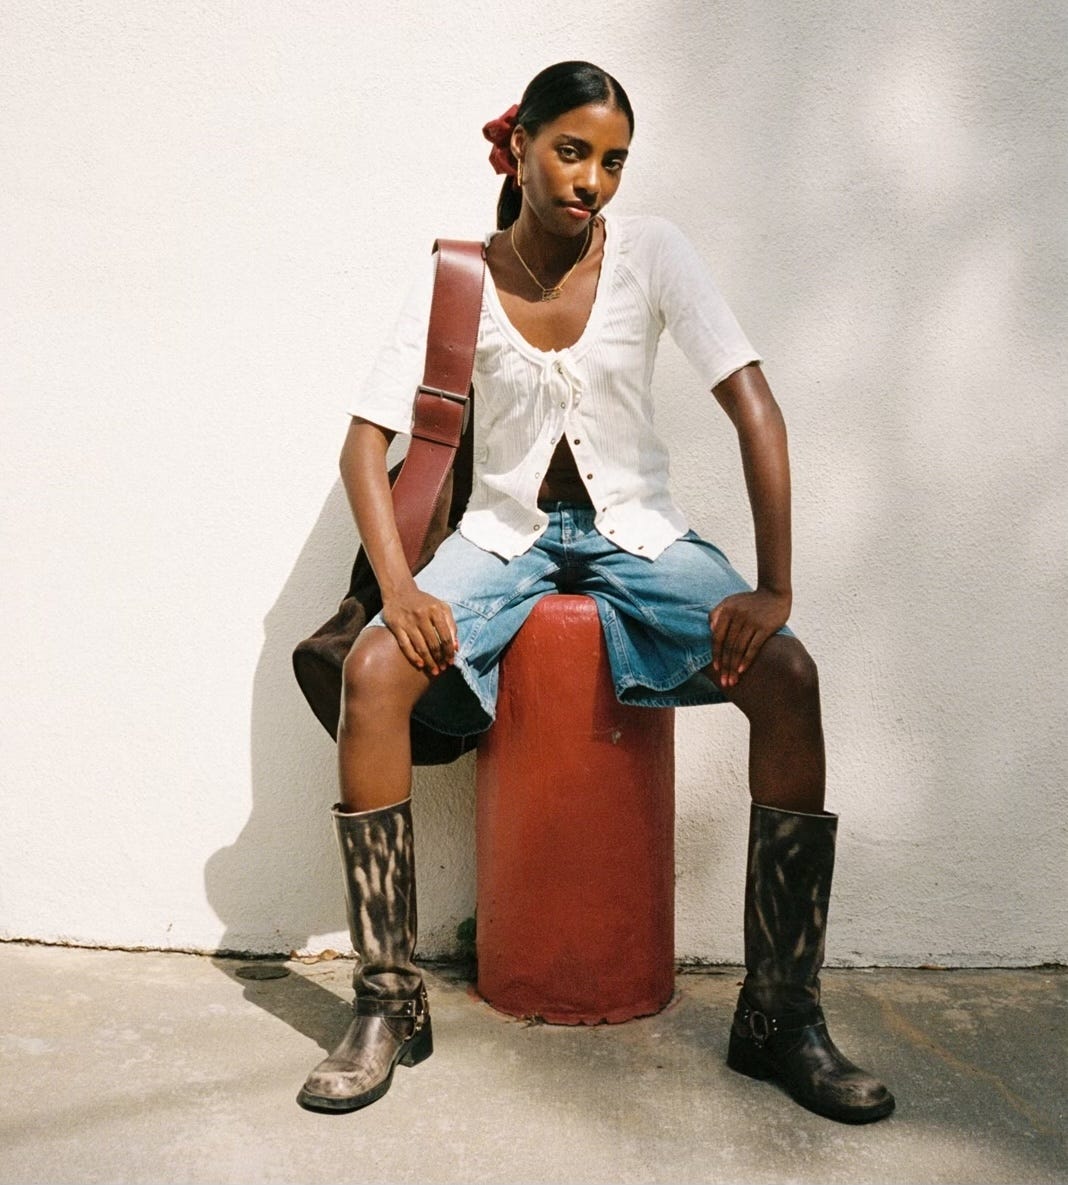 Photo of Tyra Booker sitting on a stool-like structure